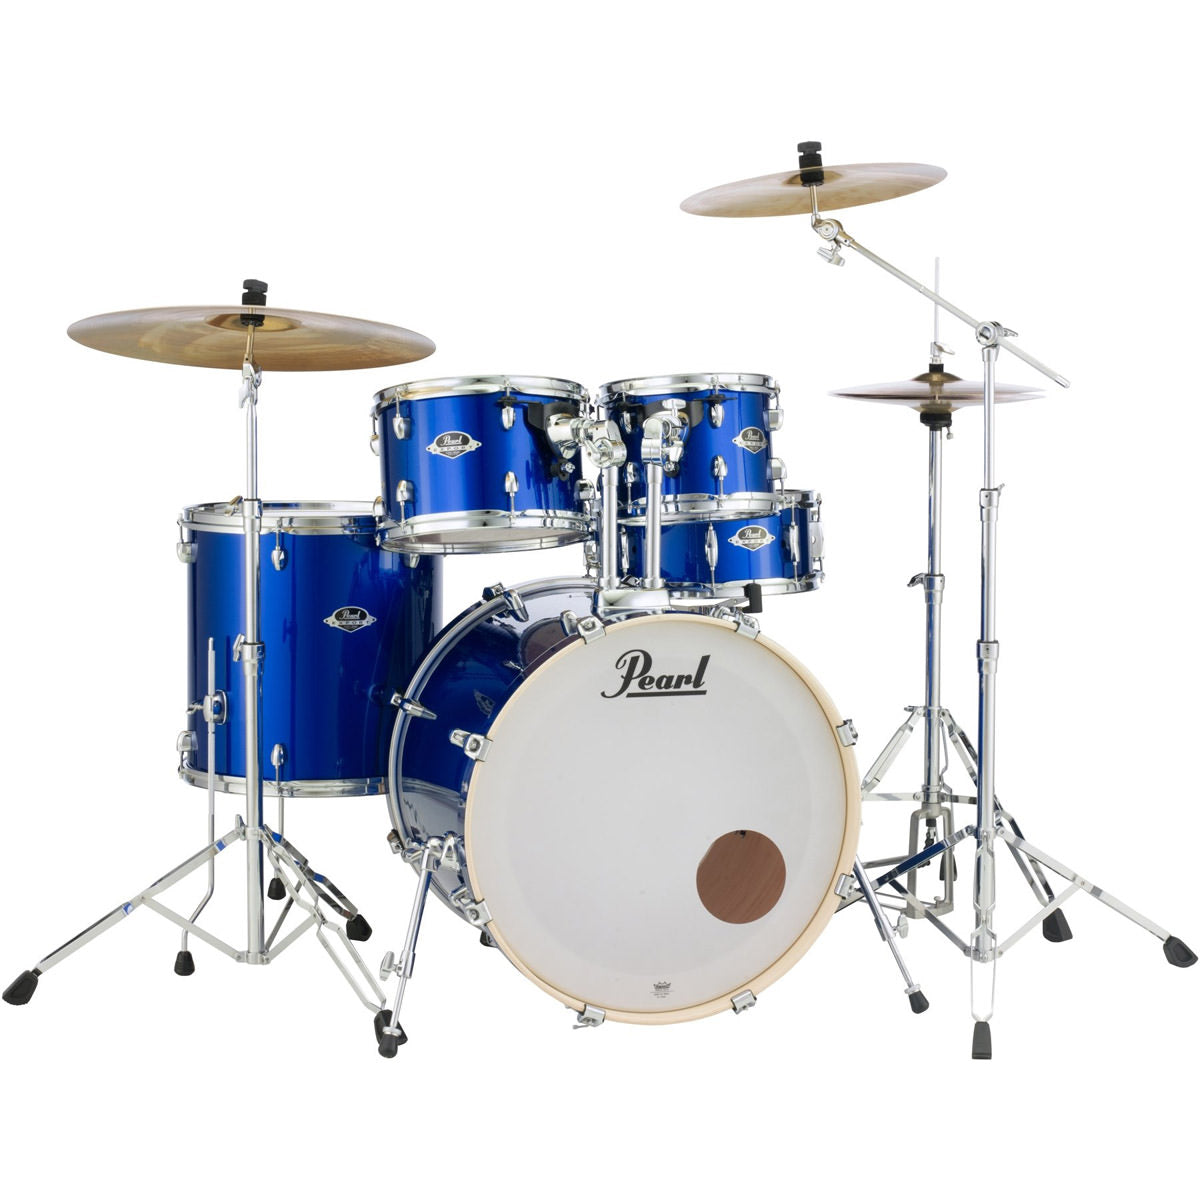 Pearl Export EXX Drum Kit - 22"BD, 10"RT, 12"RT, 16"FT & 14"SD - High Voltage Blue